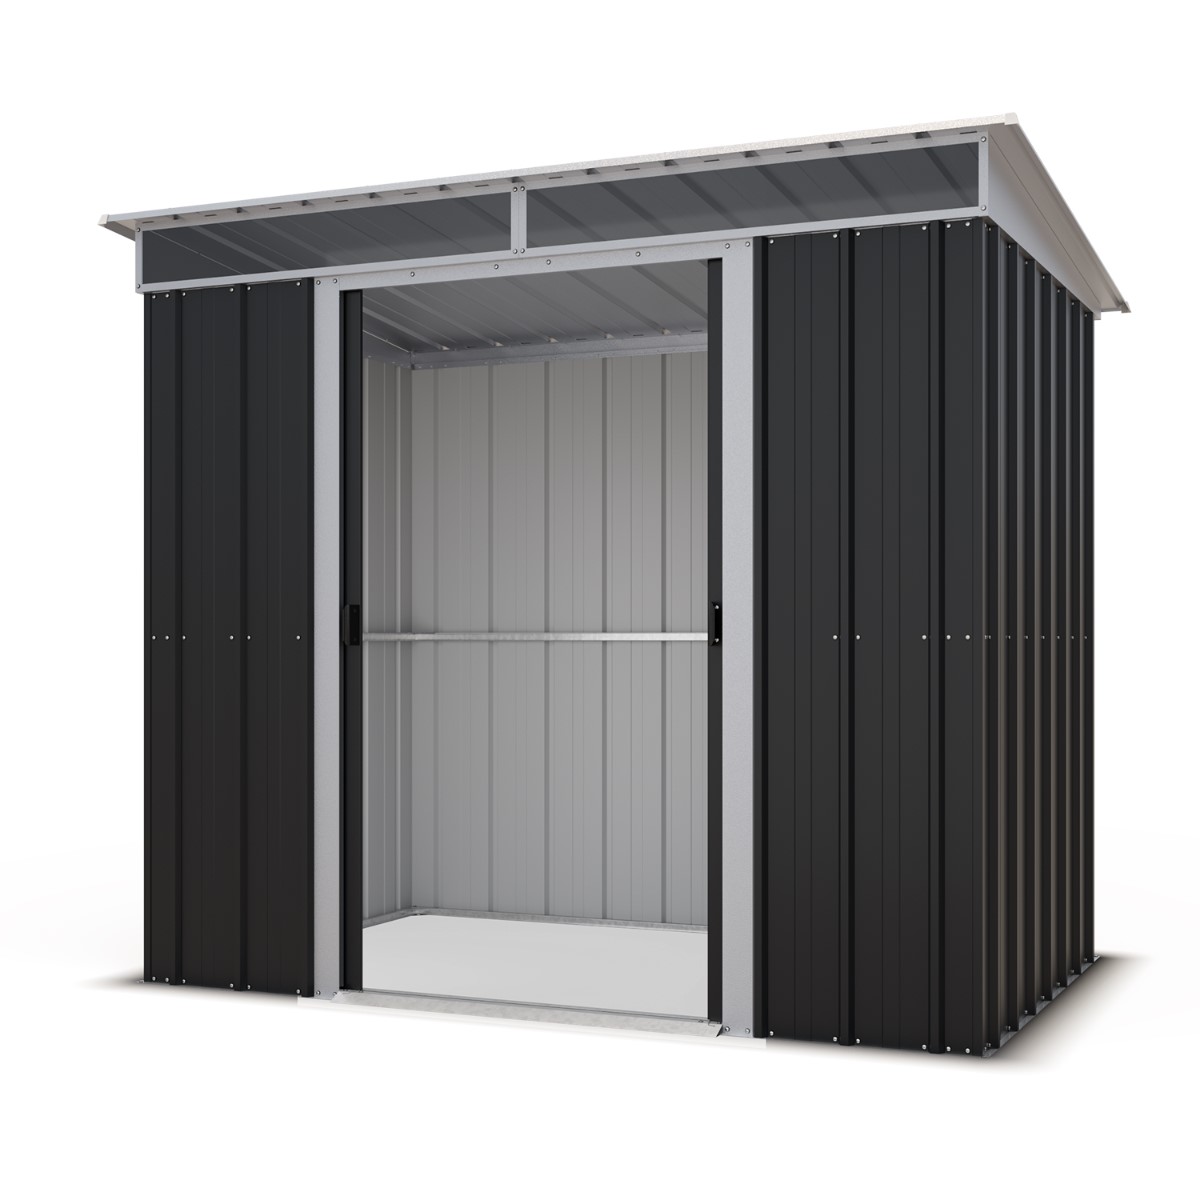 Featured image for “YardMaster 85SP18 TopLight Pent Metal Shed”